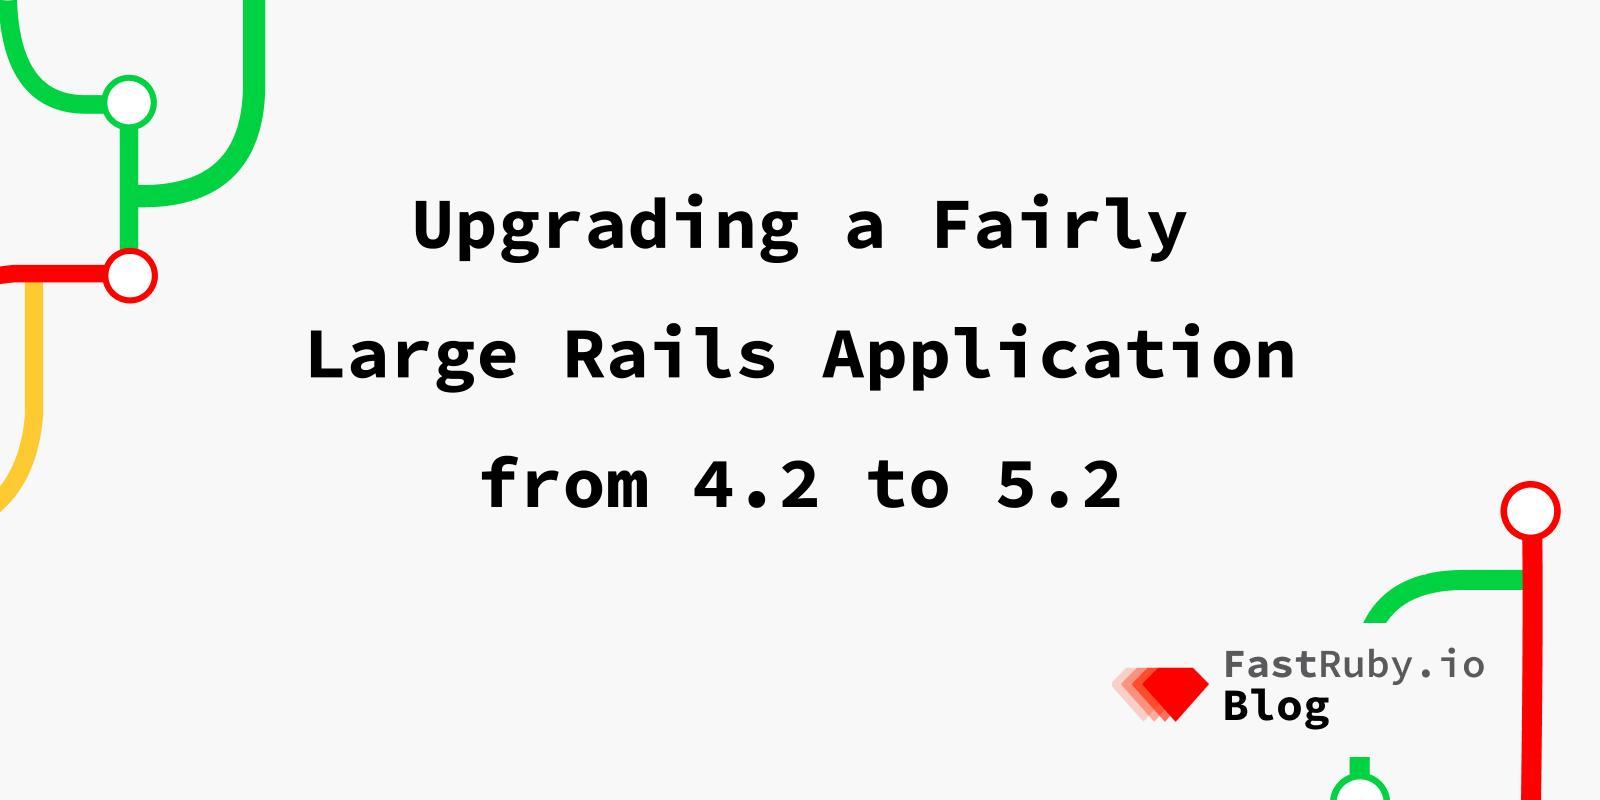 Upgrading a Fairly Large Rails Application from 4.2 to 5.2